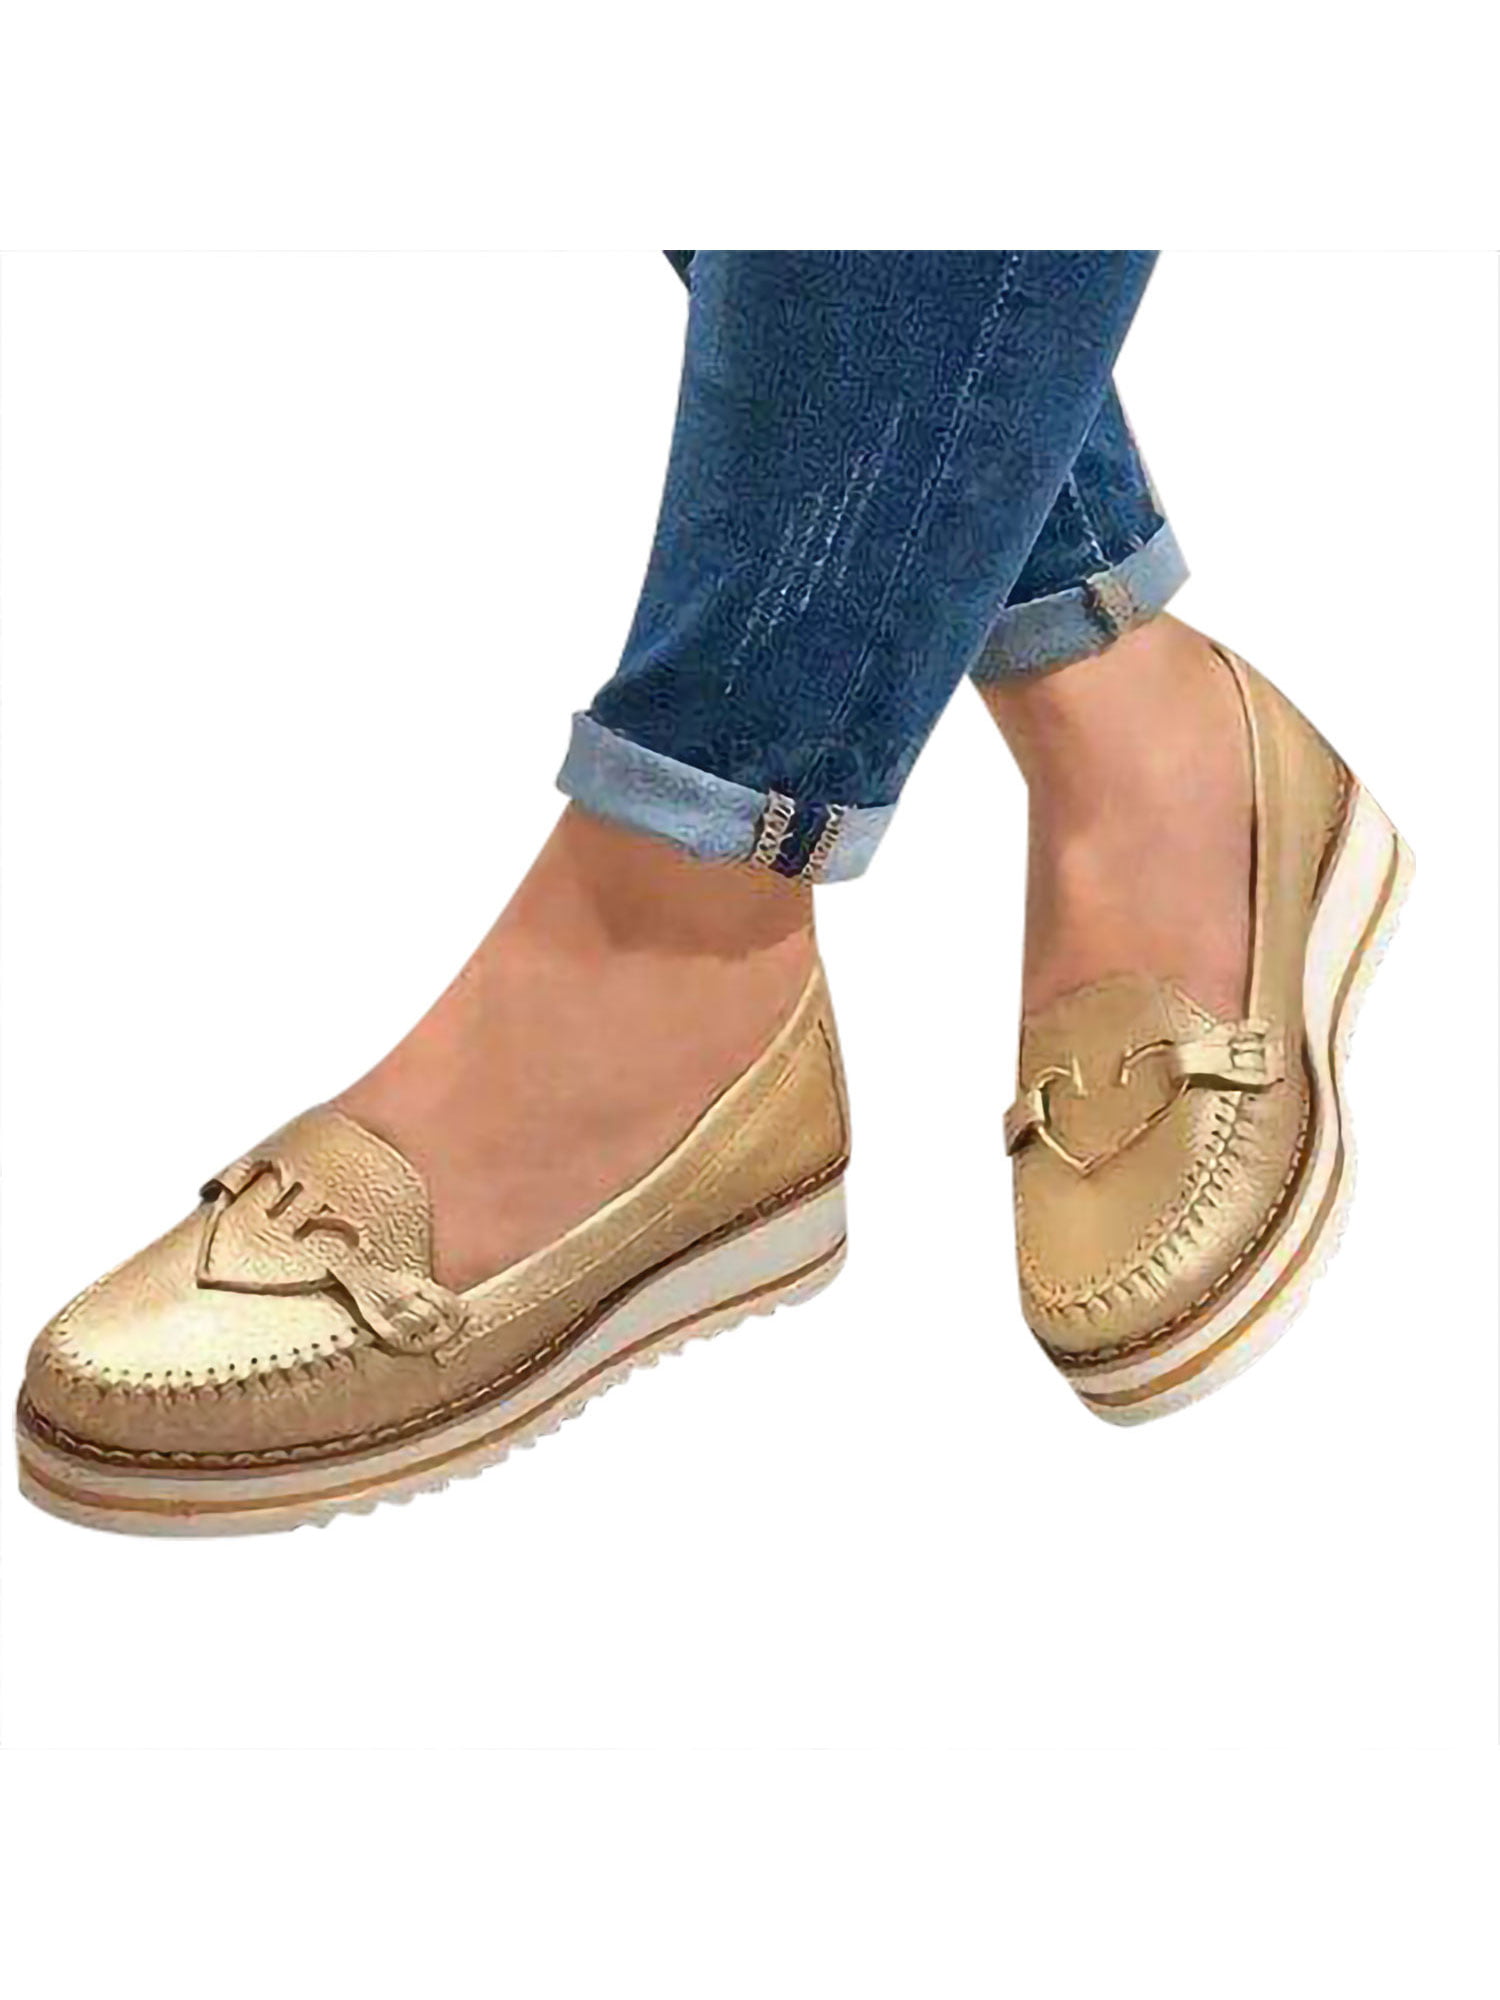 Women Summer OL Flats Shoes Leisure Pointy Toe Loafers Slip On Transparent Shoes